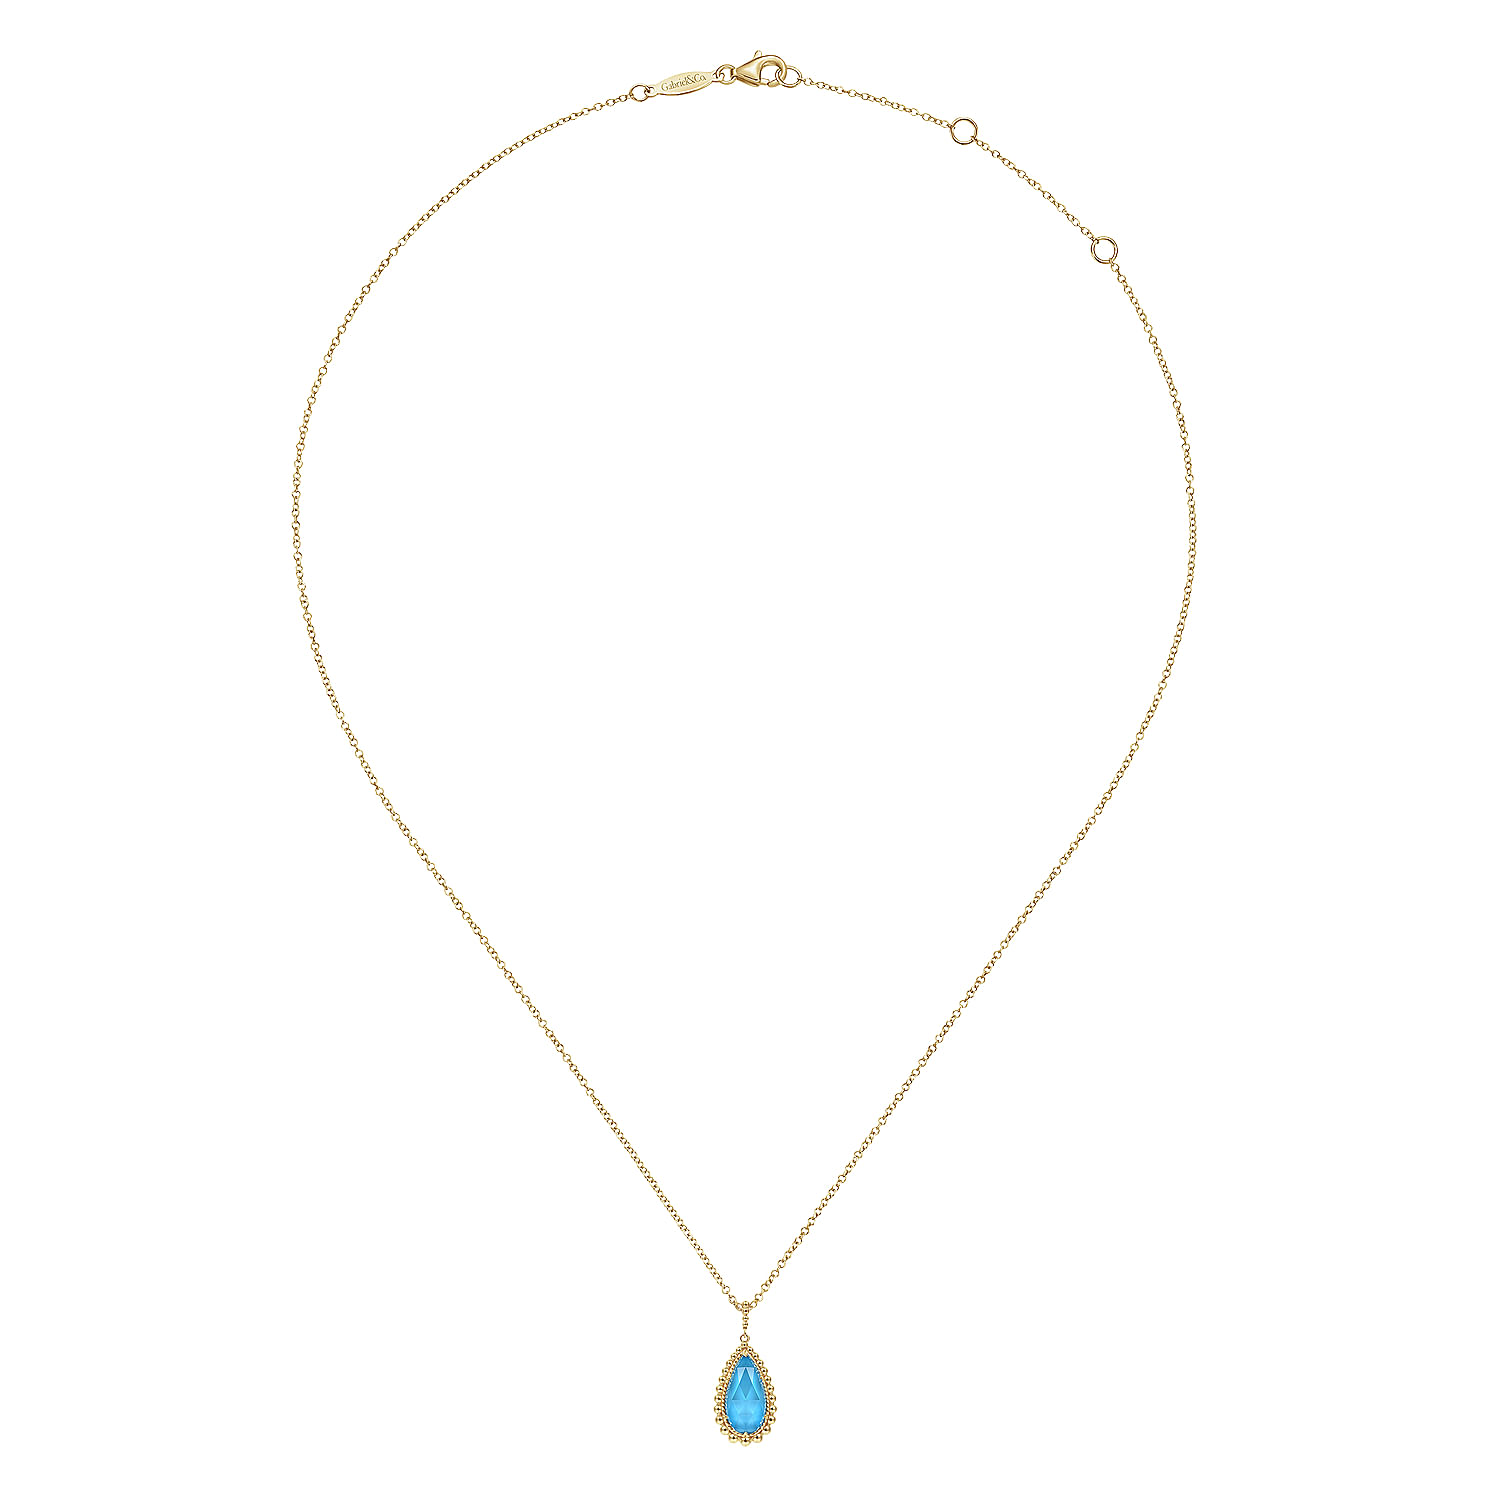 14K Yellow Gold Rock Crystal/Turquoise Pendant Necklace with Bujukan Beads